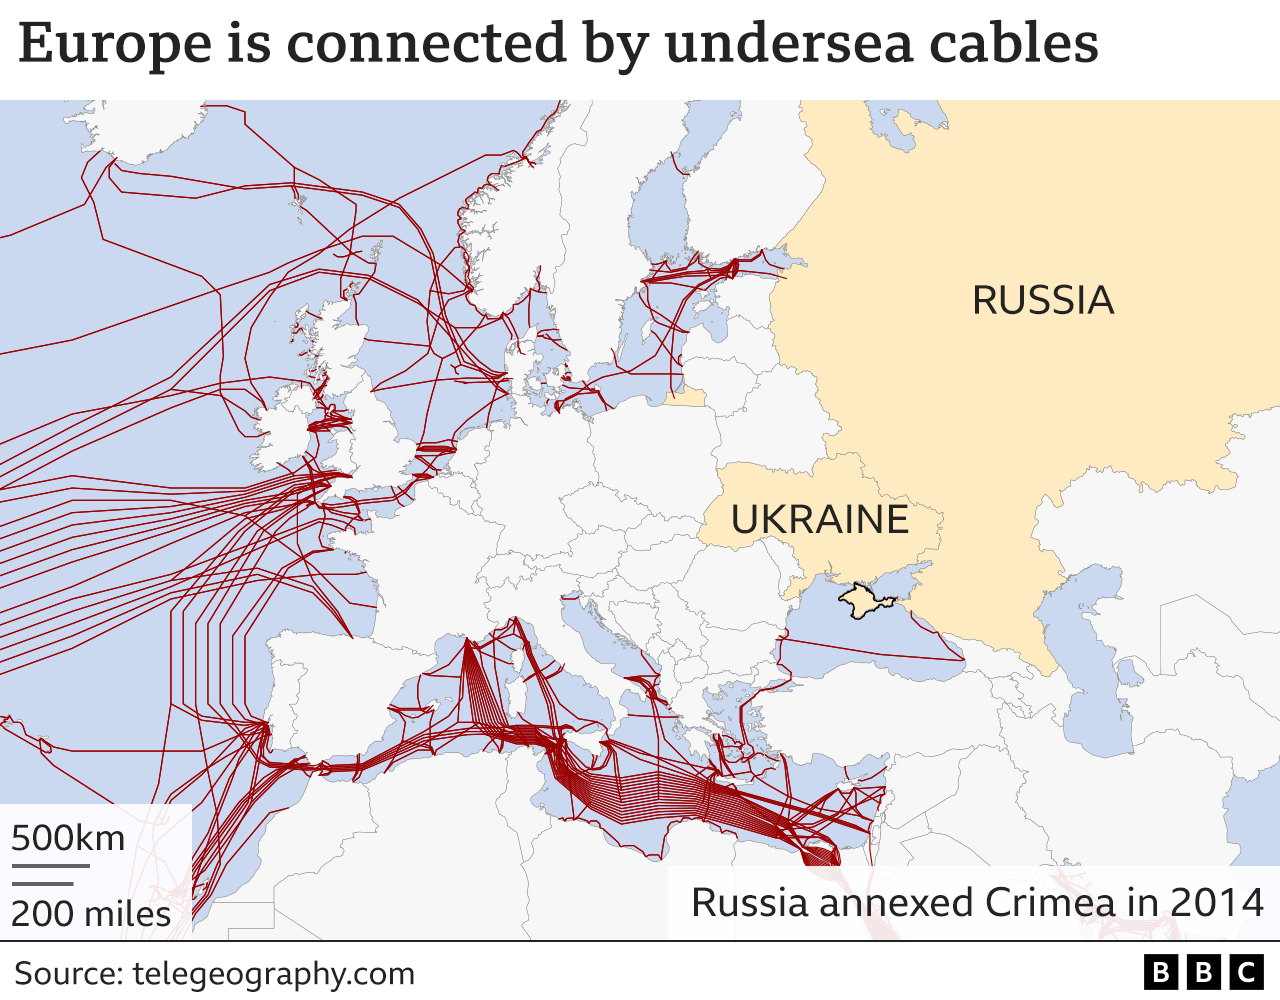 Undersea cables in Europe